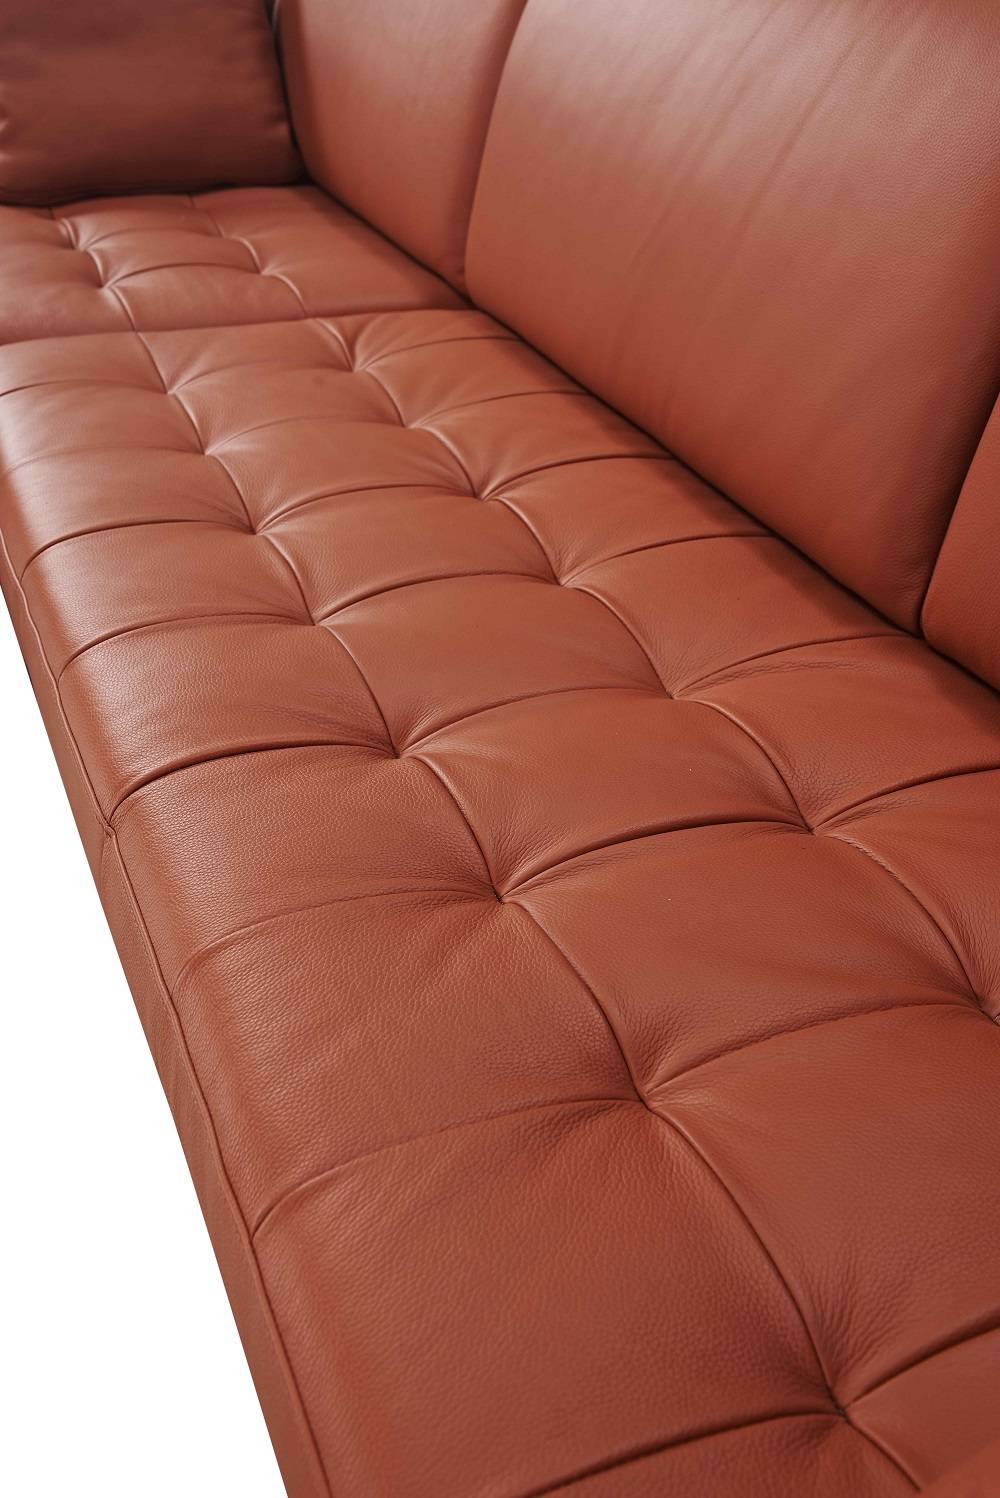 Pumpkin Italian Leather Sectional Sofa with Throw Pillows - Click Image to Close